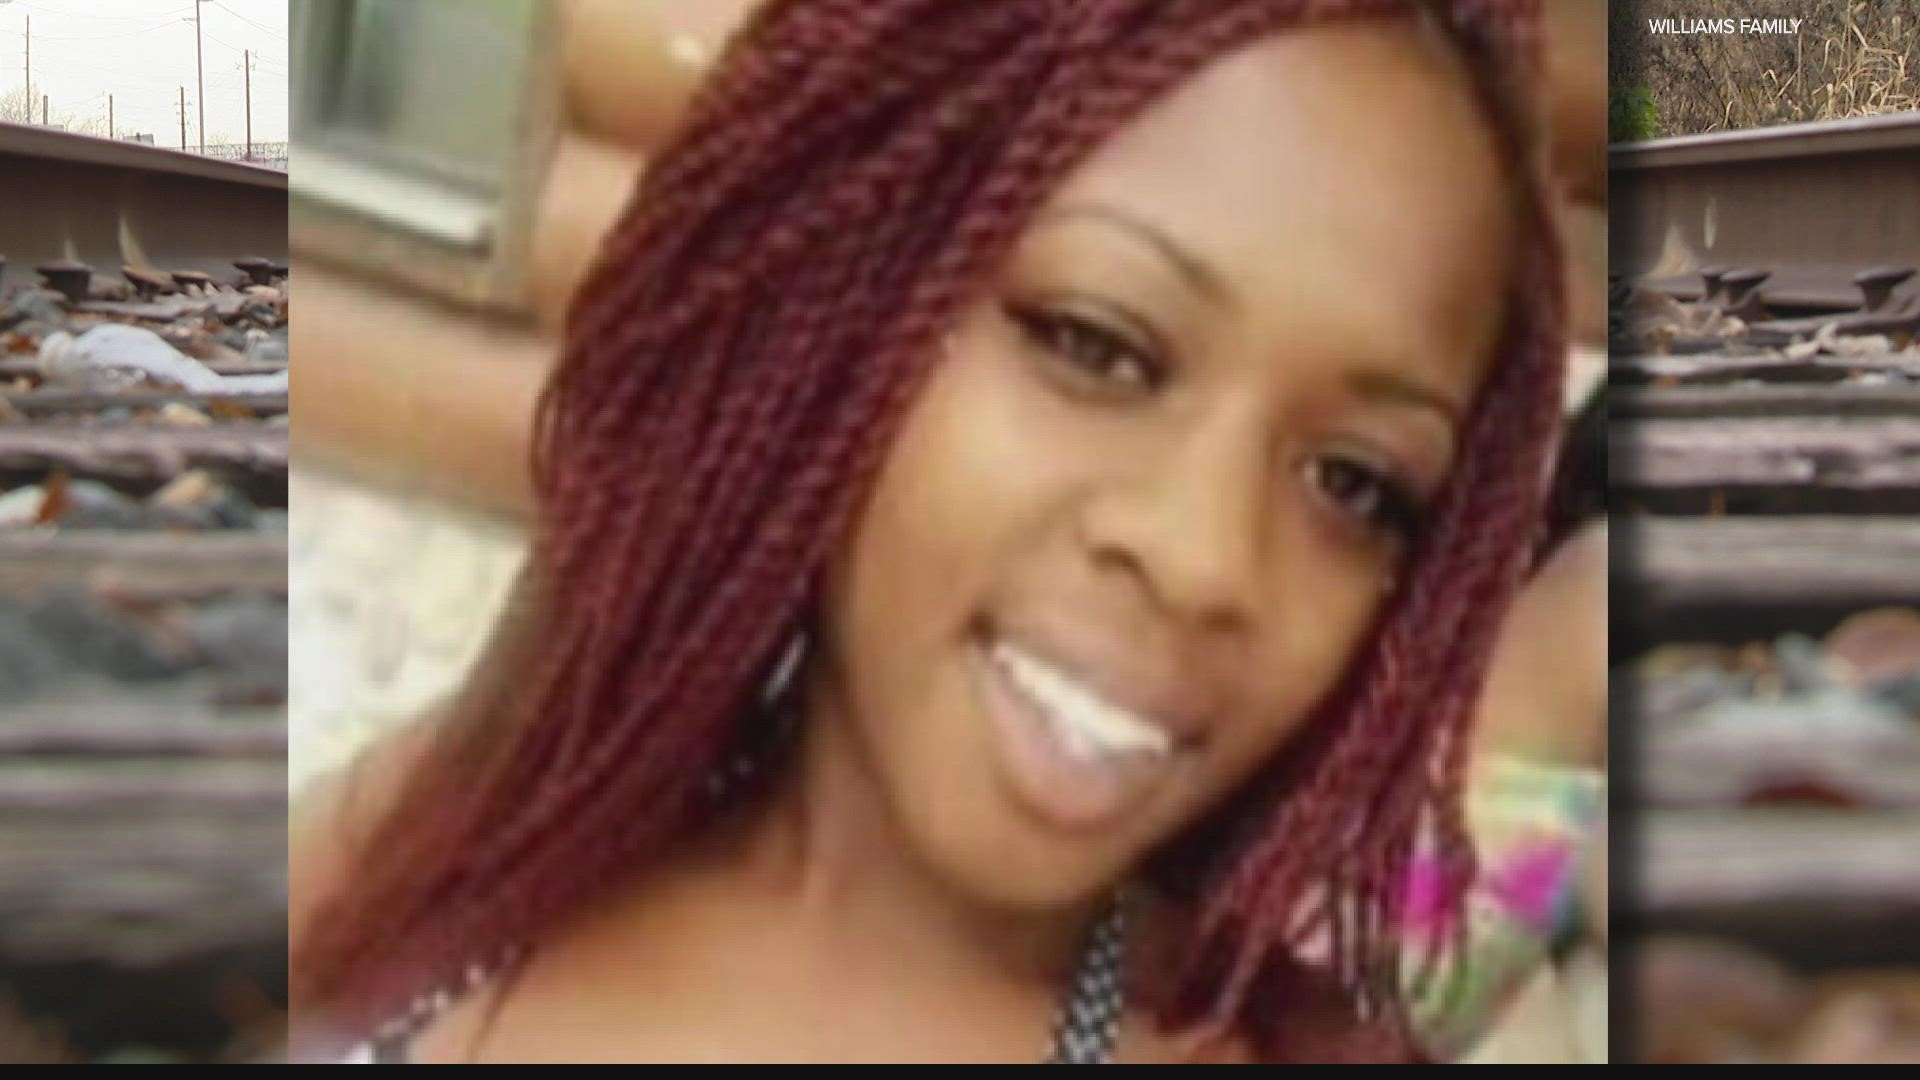 Police said 24-year-old Nakyla Williams was last seen getting into a white pickup truck in the 4800 block of North Kenmore Road.